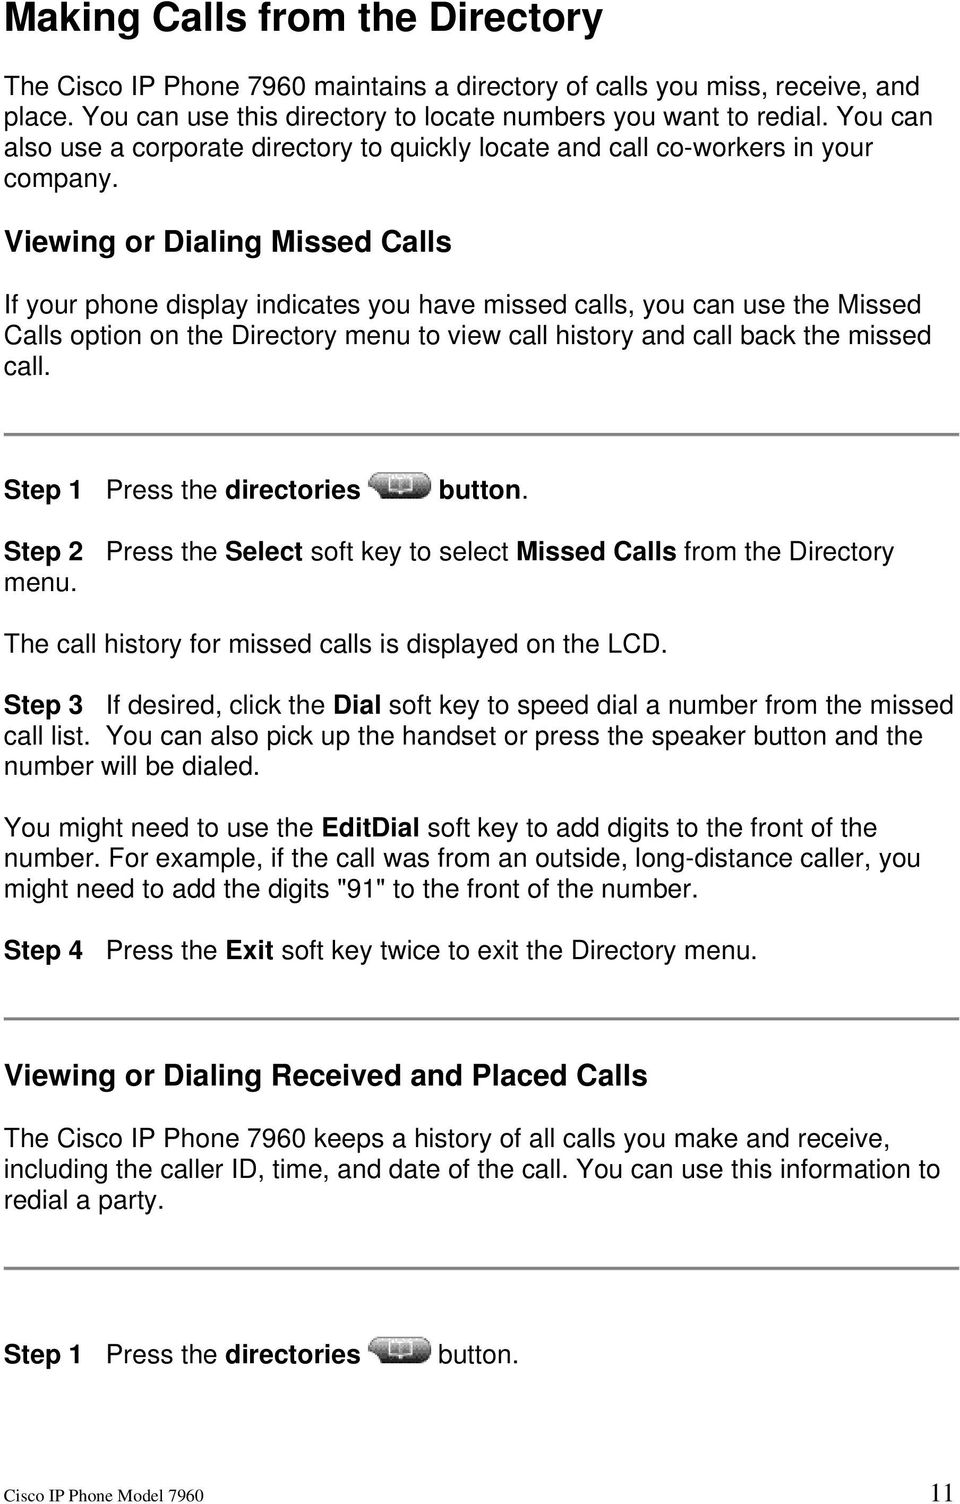 Viewing or Dialing Missed Calls If your phone display indicates you have missed calls, you can use the Missed Calls option on the Directory menu to view call history and call back the missed call.